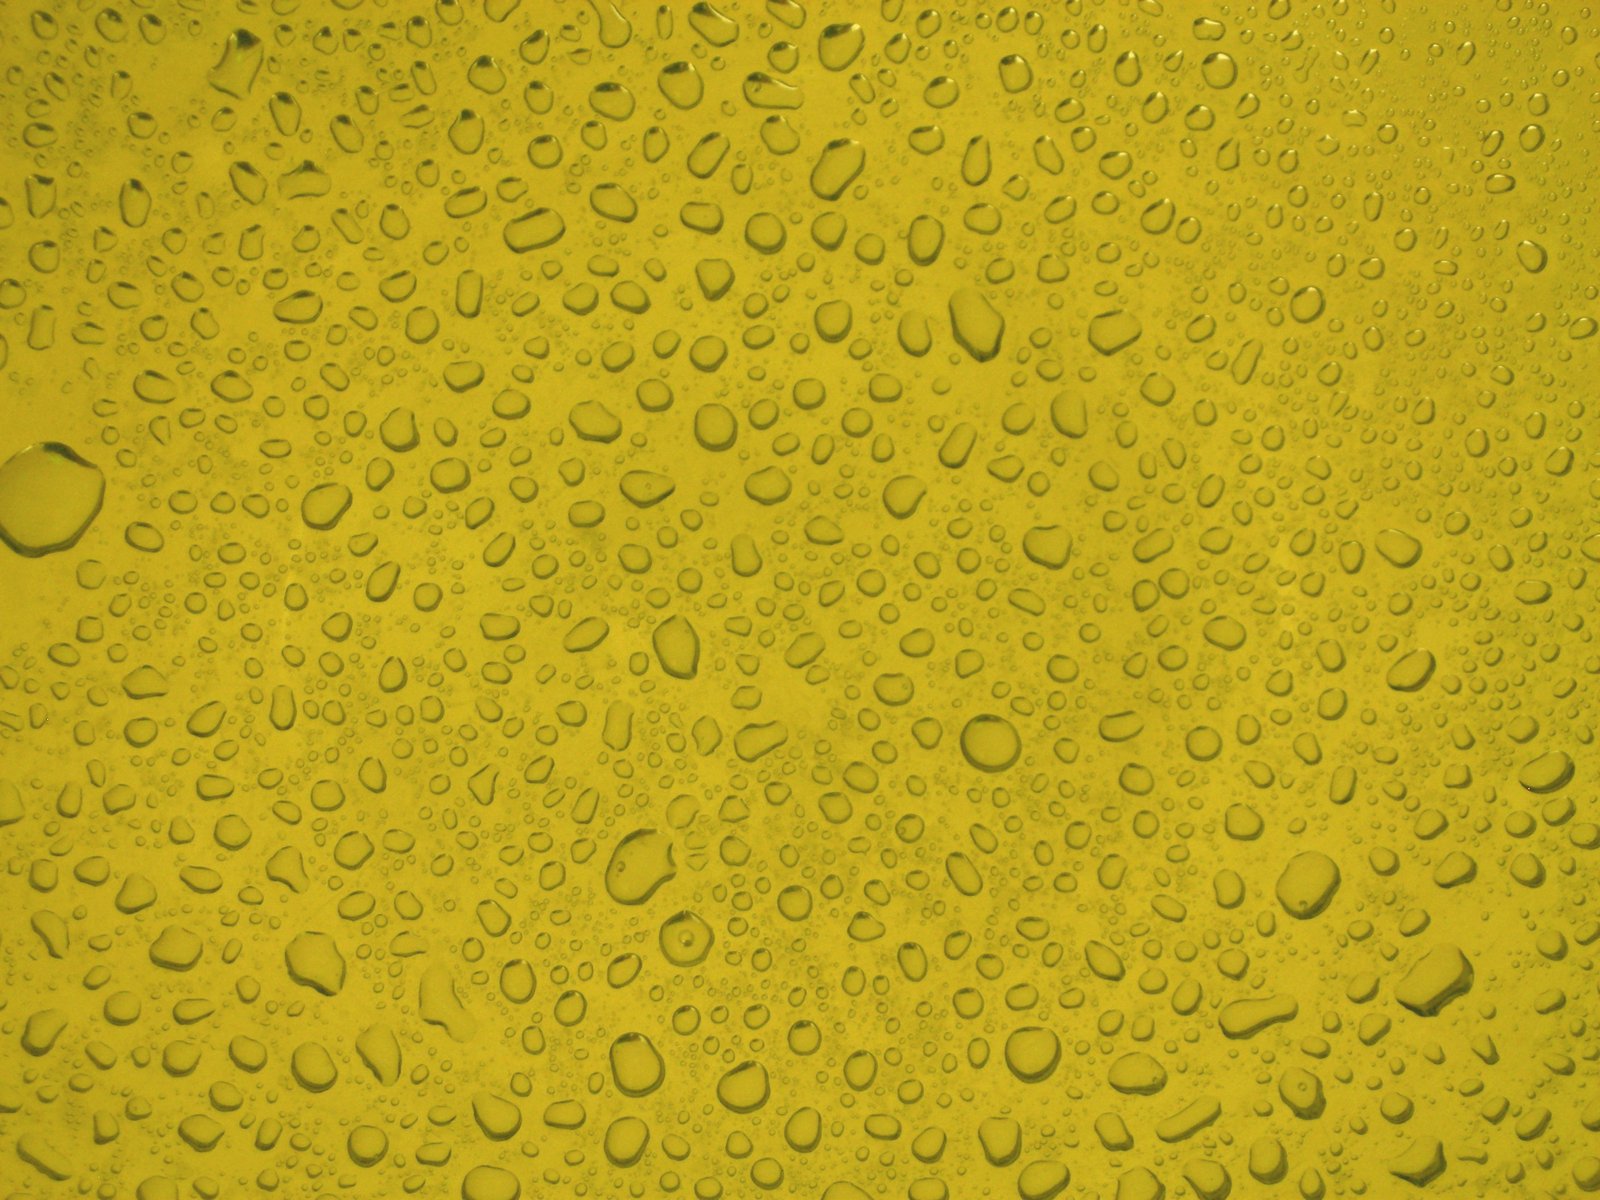 an extreme close up image of water drops